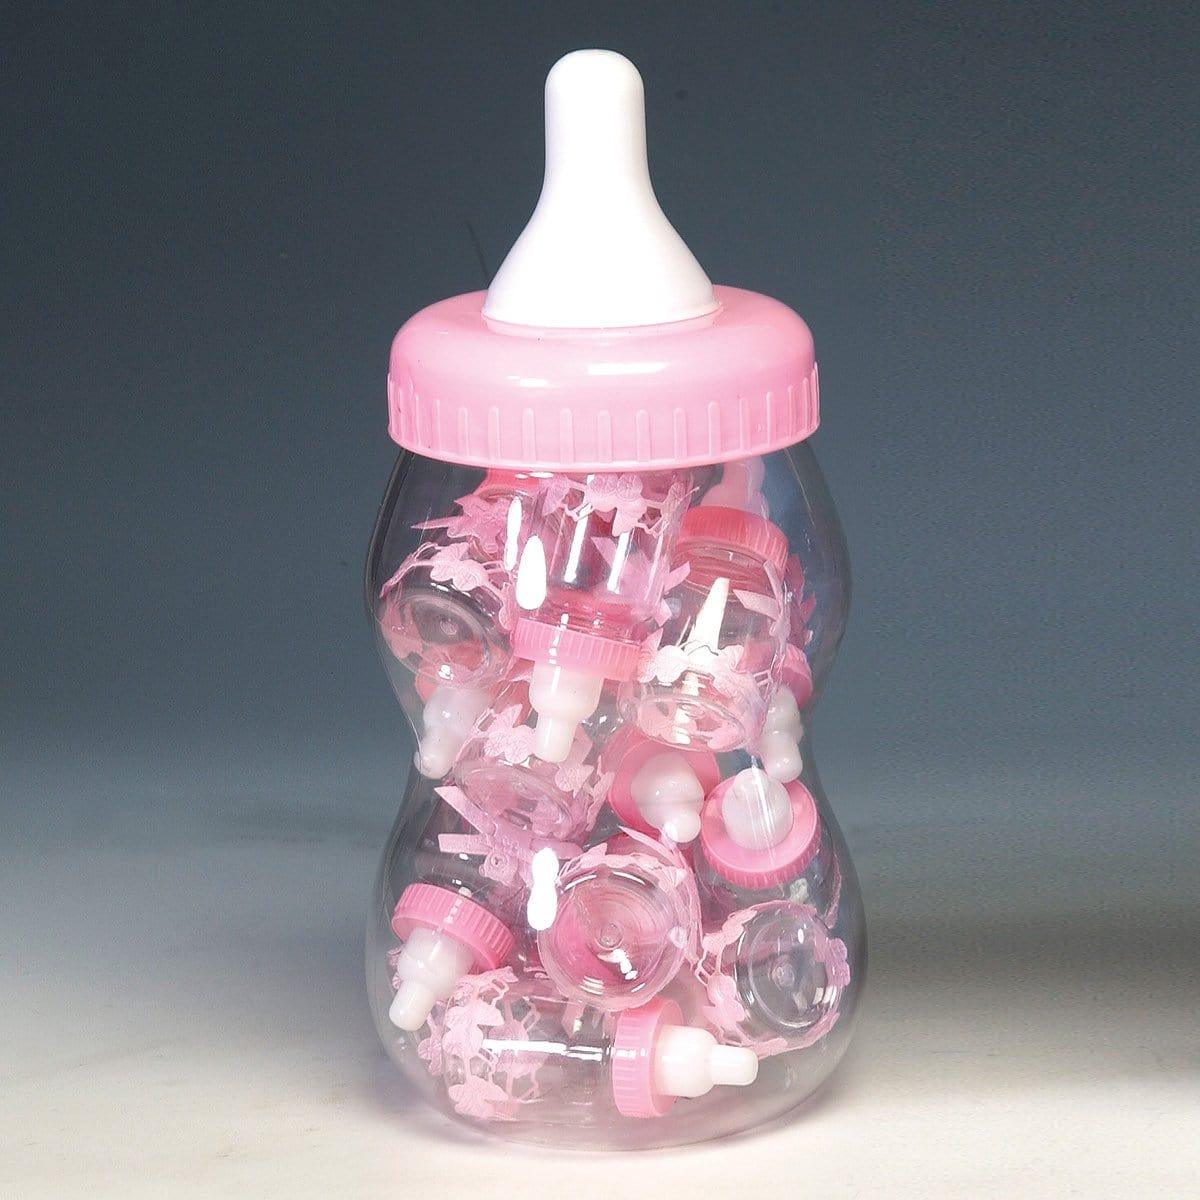 Buy Baby Shower Pink plastic baby bottle with 16 mini bottles, 13 inches sold at Party Expert